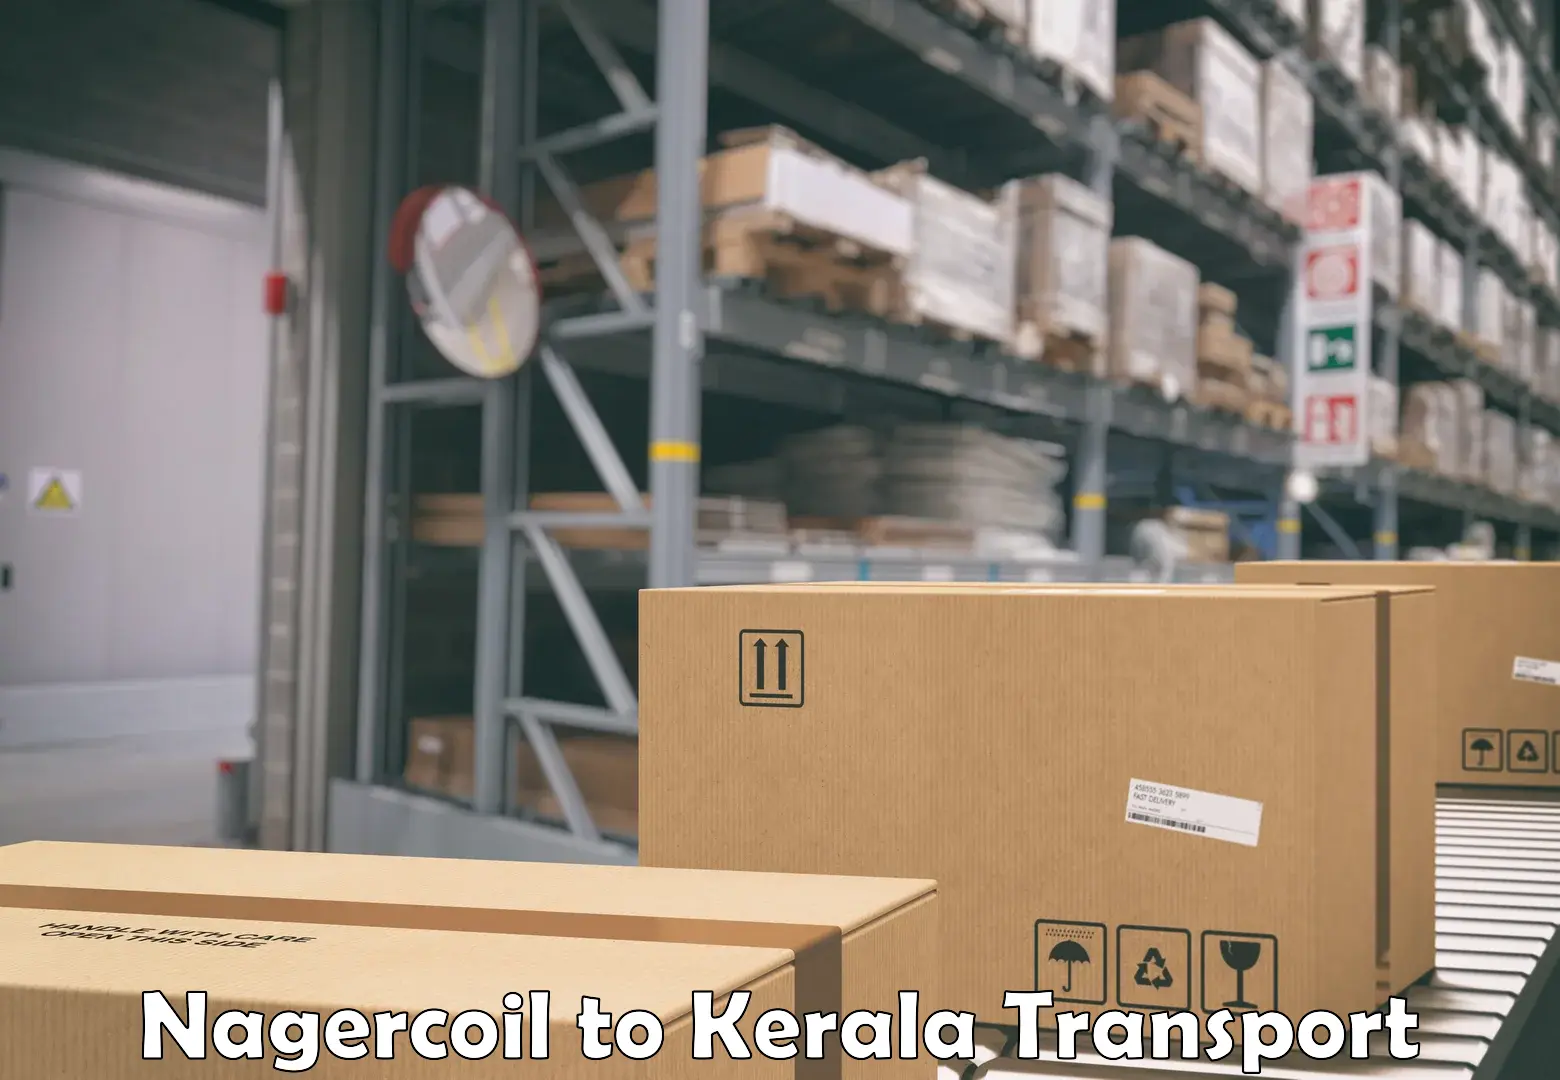 Transport shared services Nagercoil to Kerala